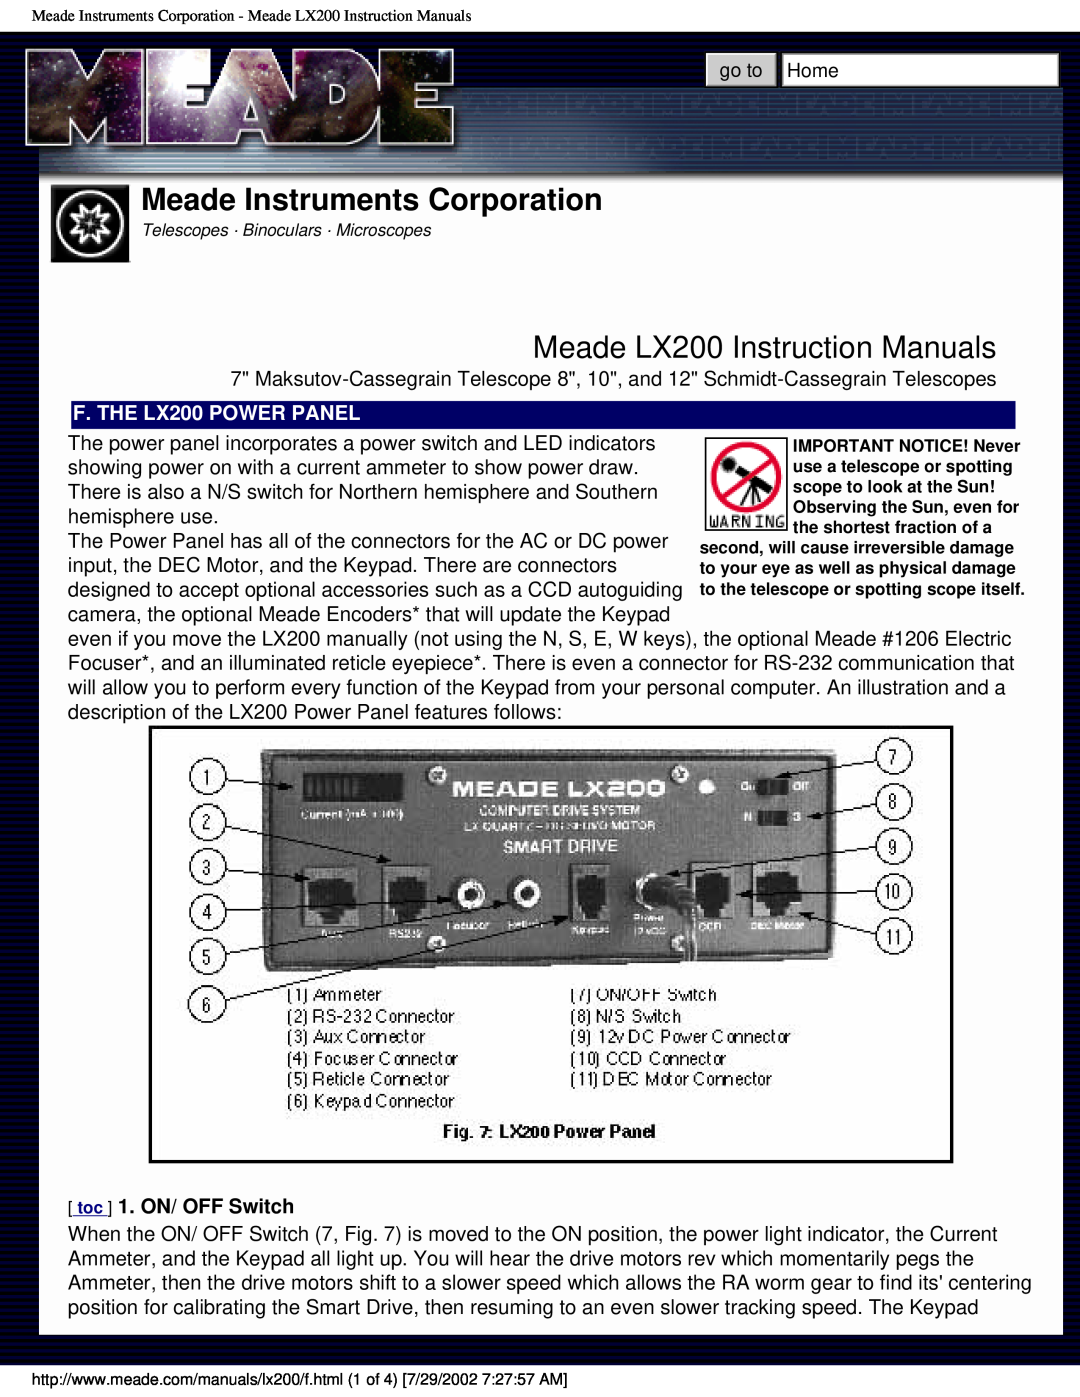 Meade Meade Instruments Corporation, Meade LX200 Instruction Manuals, F. THE LX200 POWER PANEL, toc 1. ON/ OFF Switch 